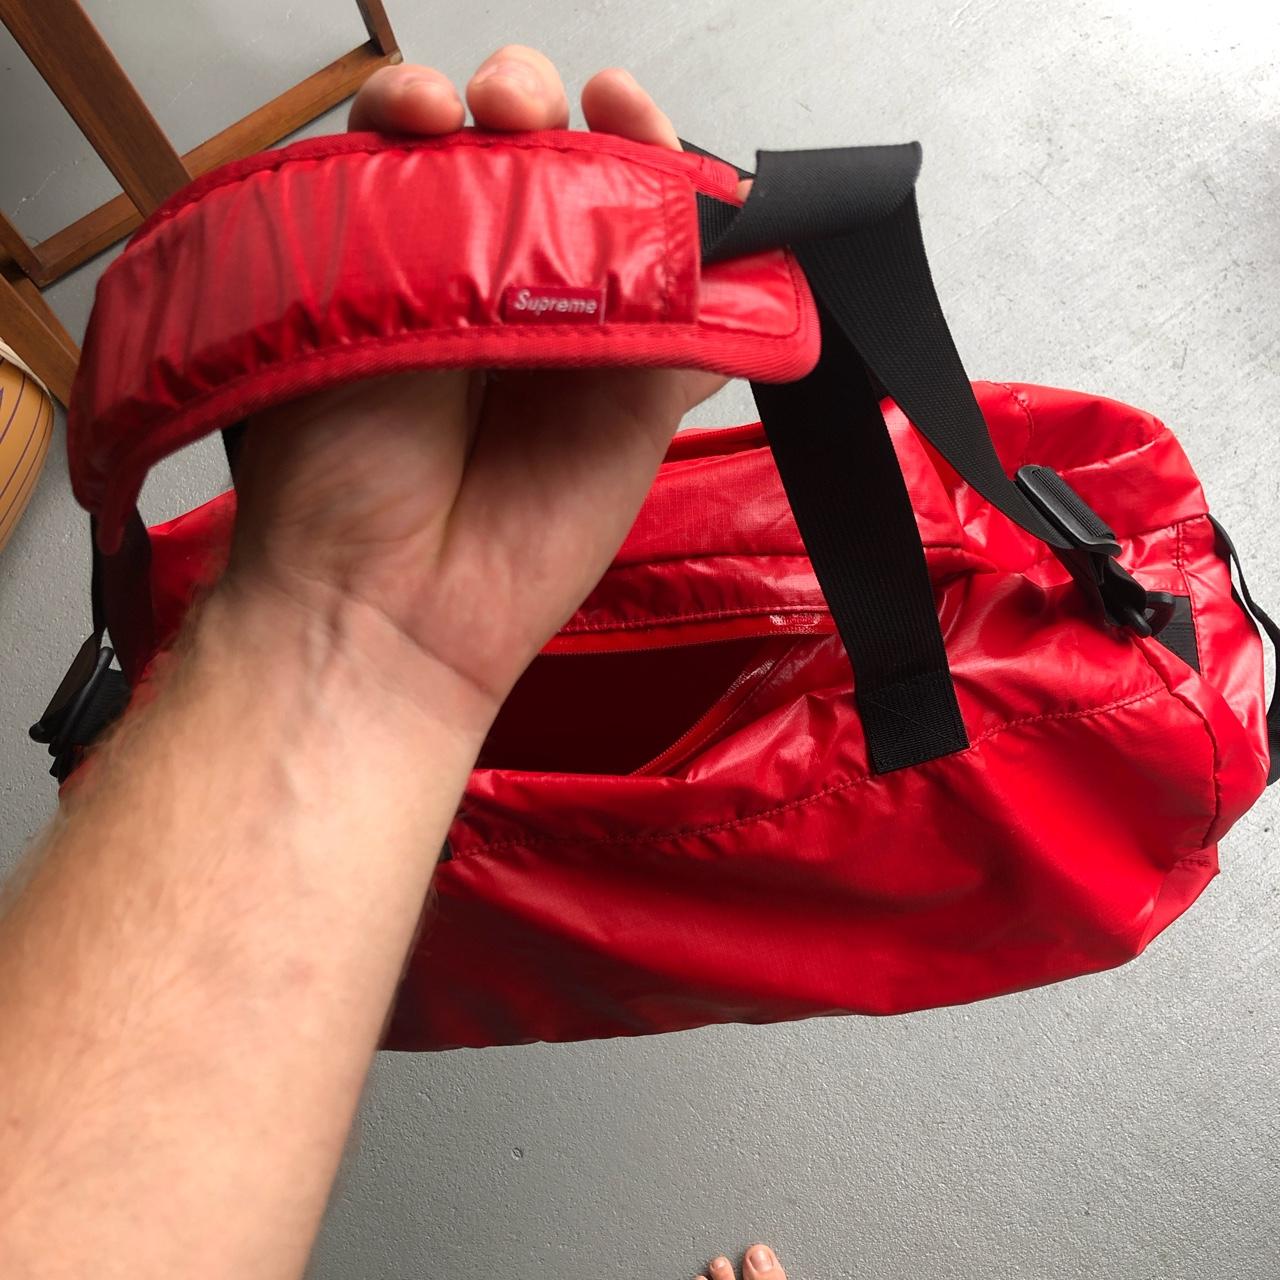 Supreme duffle bag 19ss Red Strap is included Its - Depop